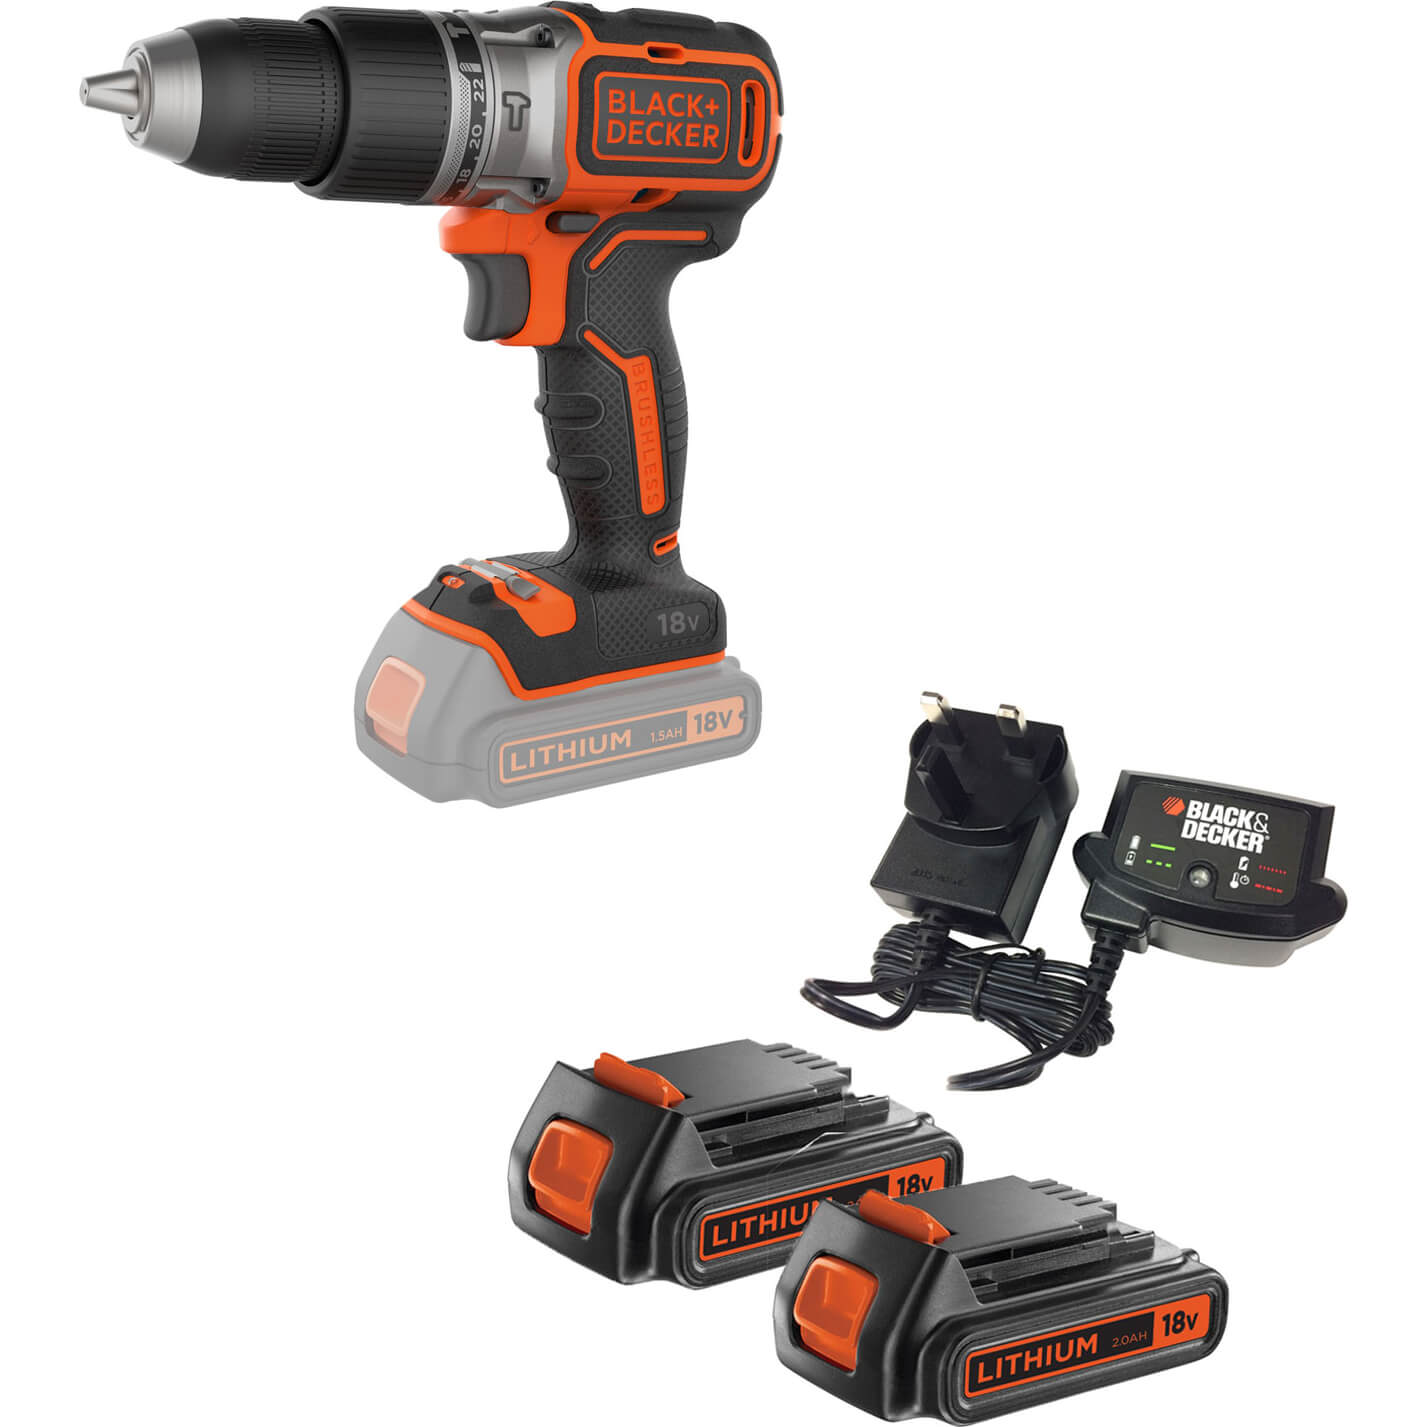 Image of Black and Decker BL188 18v Cordless Brushless Combi Drill 2 x 2ah Li-ion Charger No Case